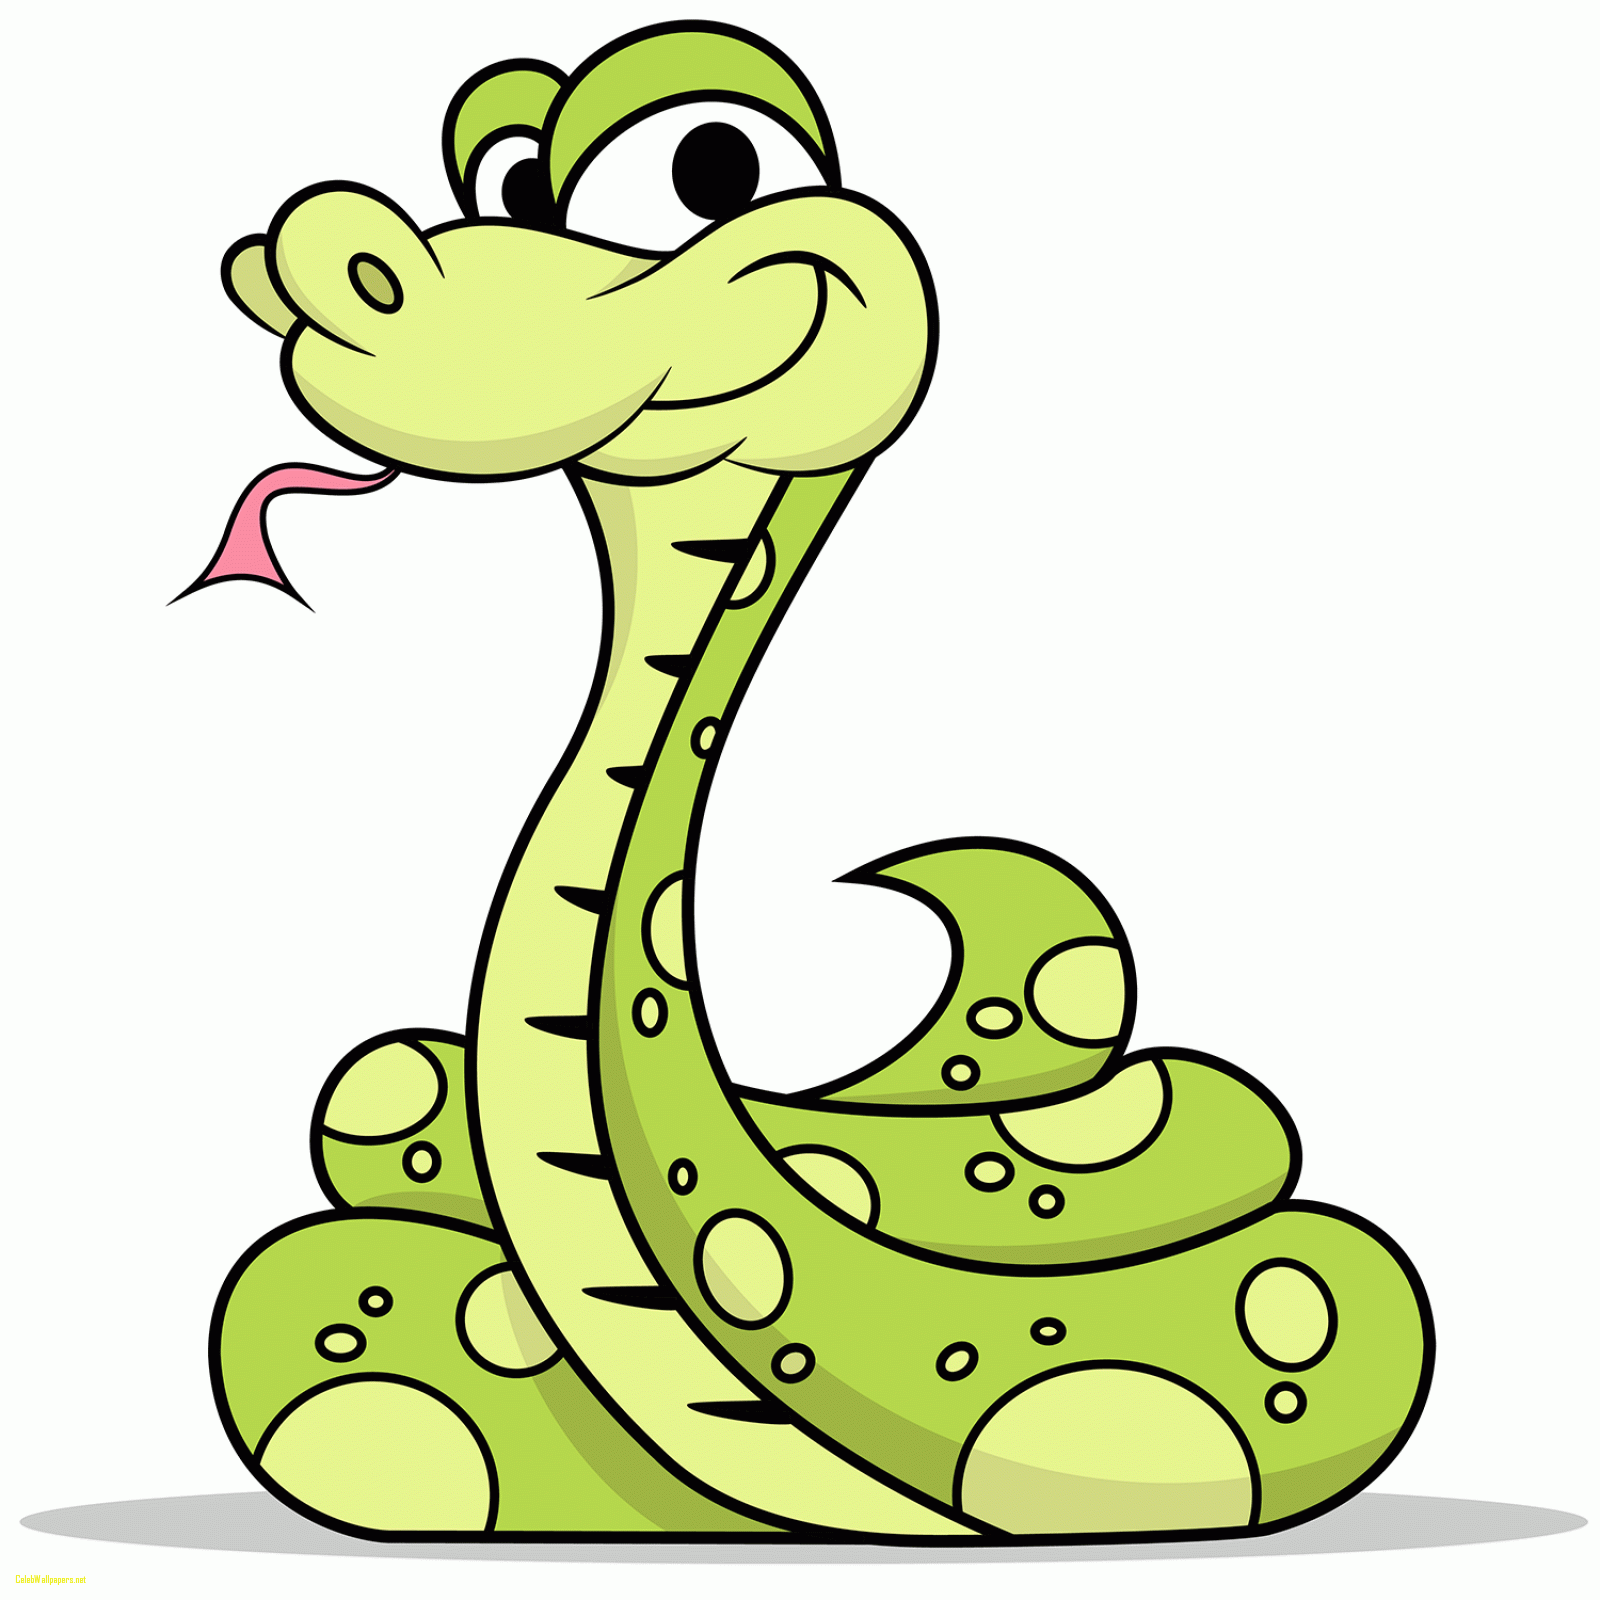 Free images cliparting awesome. Snake clipart